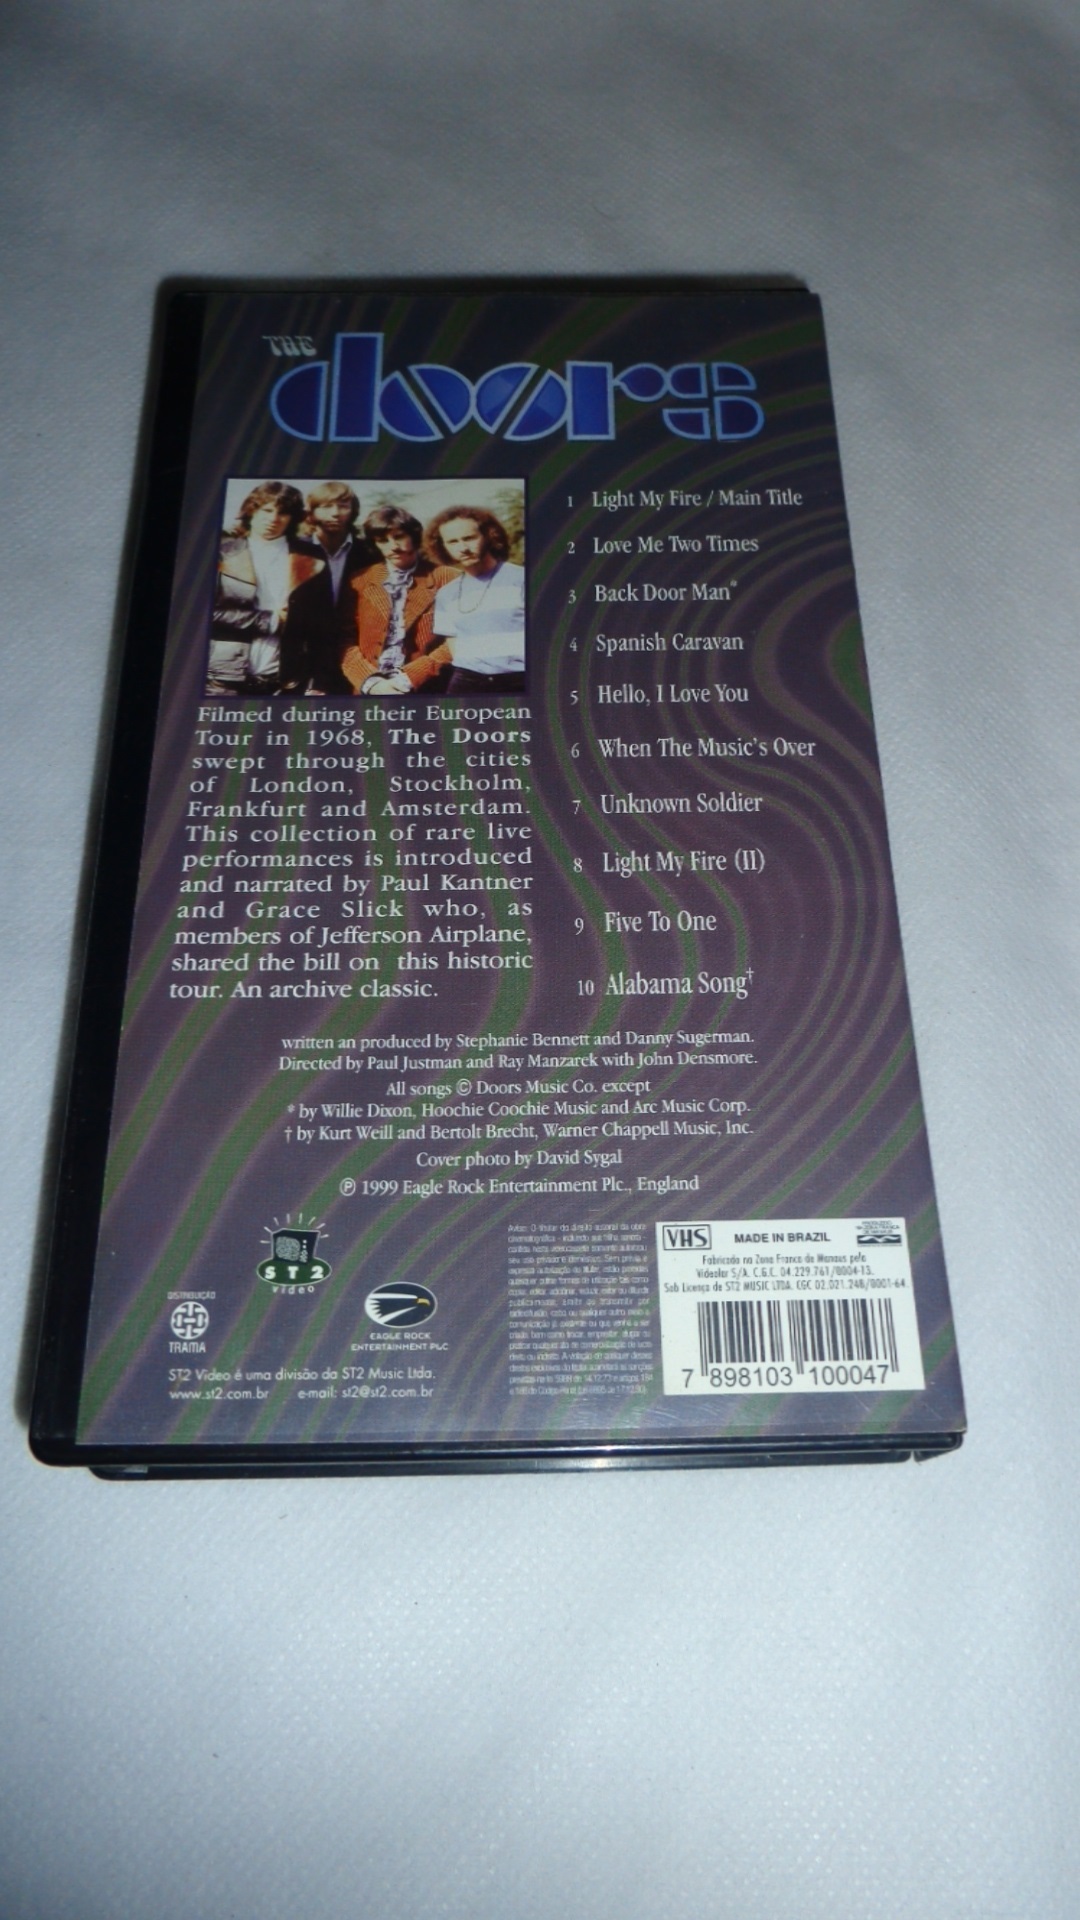 FITA VHS - Doors The - Live In Europe 1968